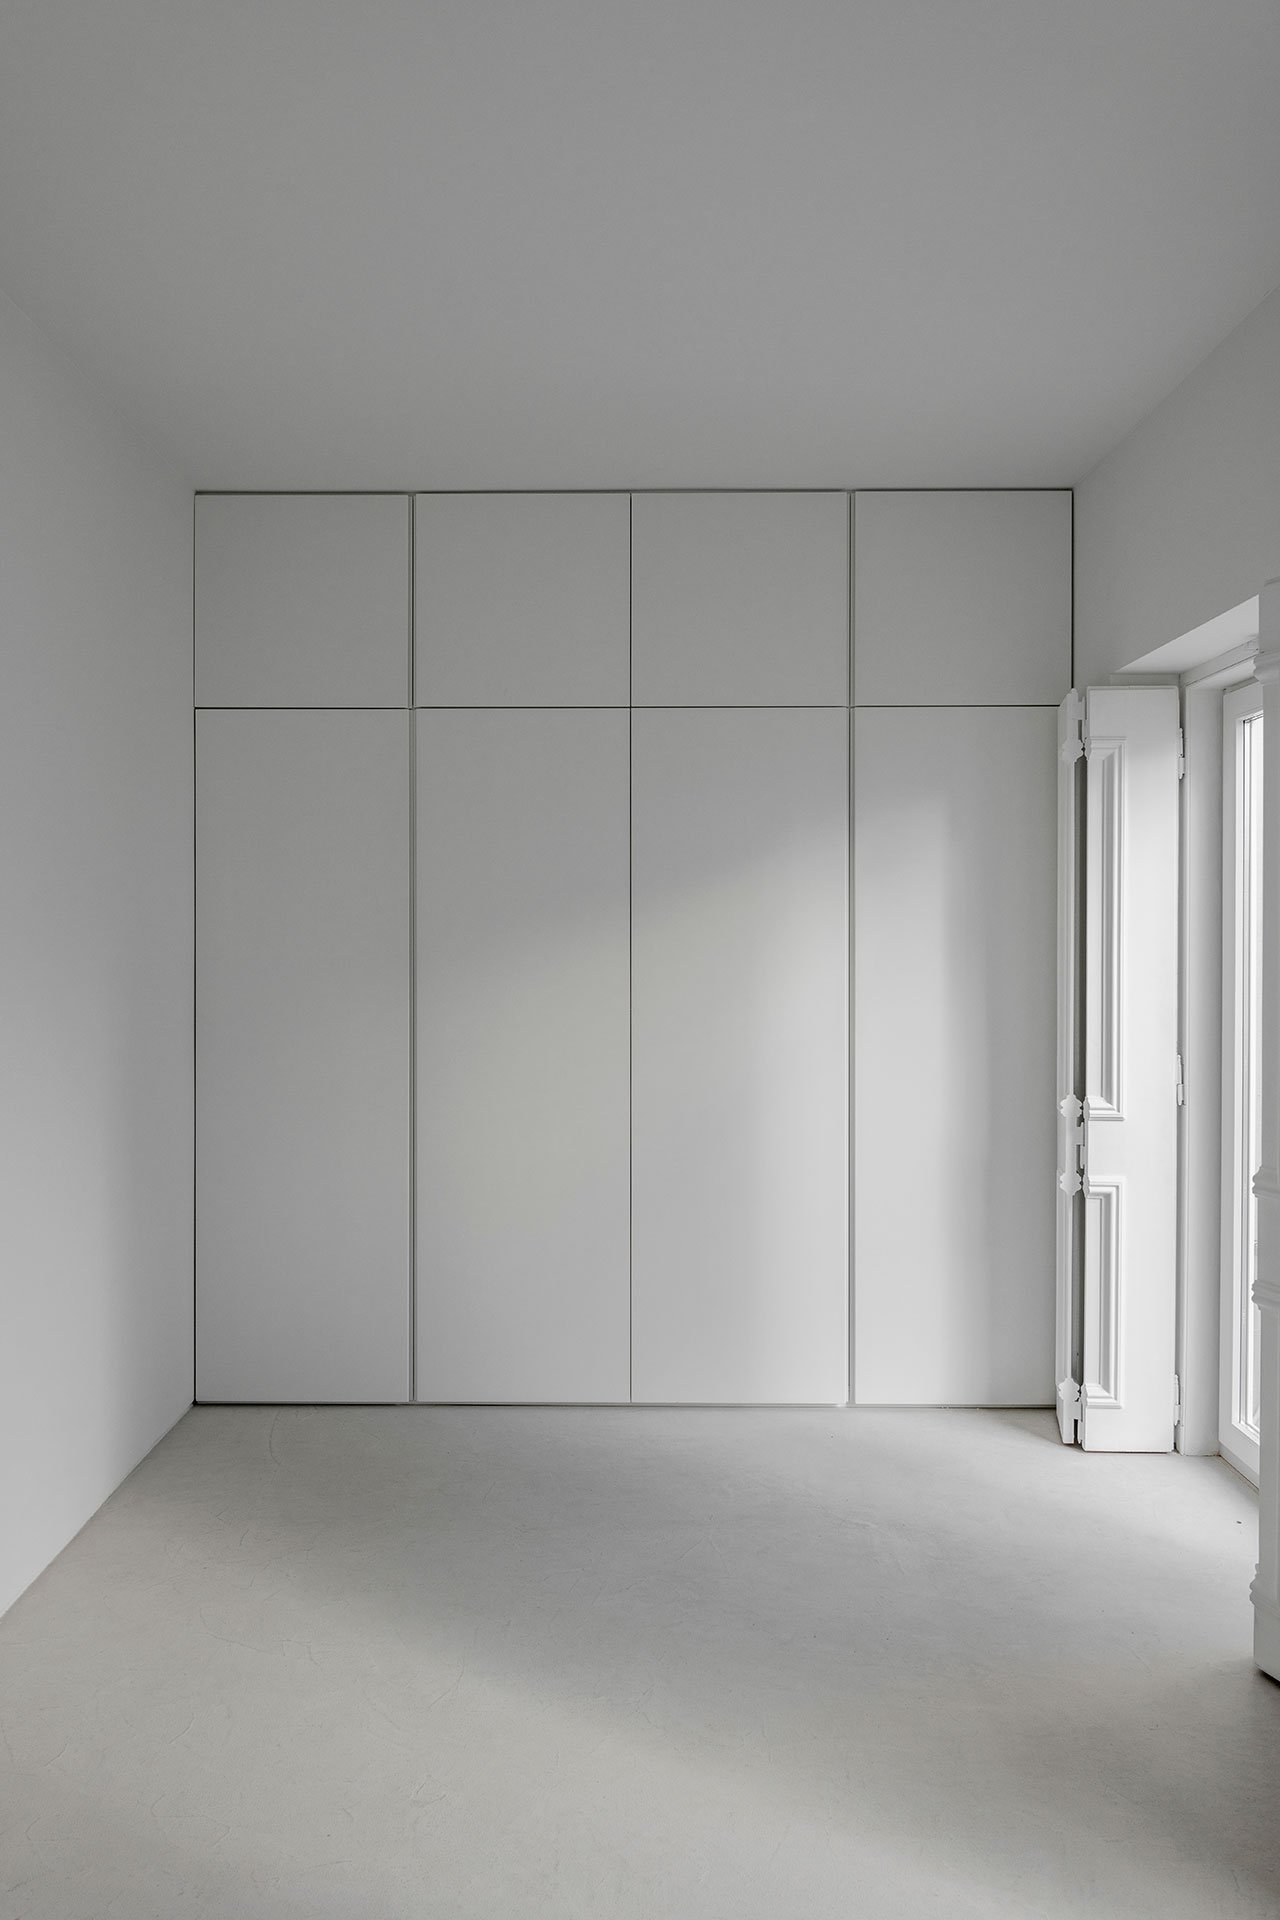 The storage was sleek and hidden to declutter the spaces and keep them minimalist